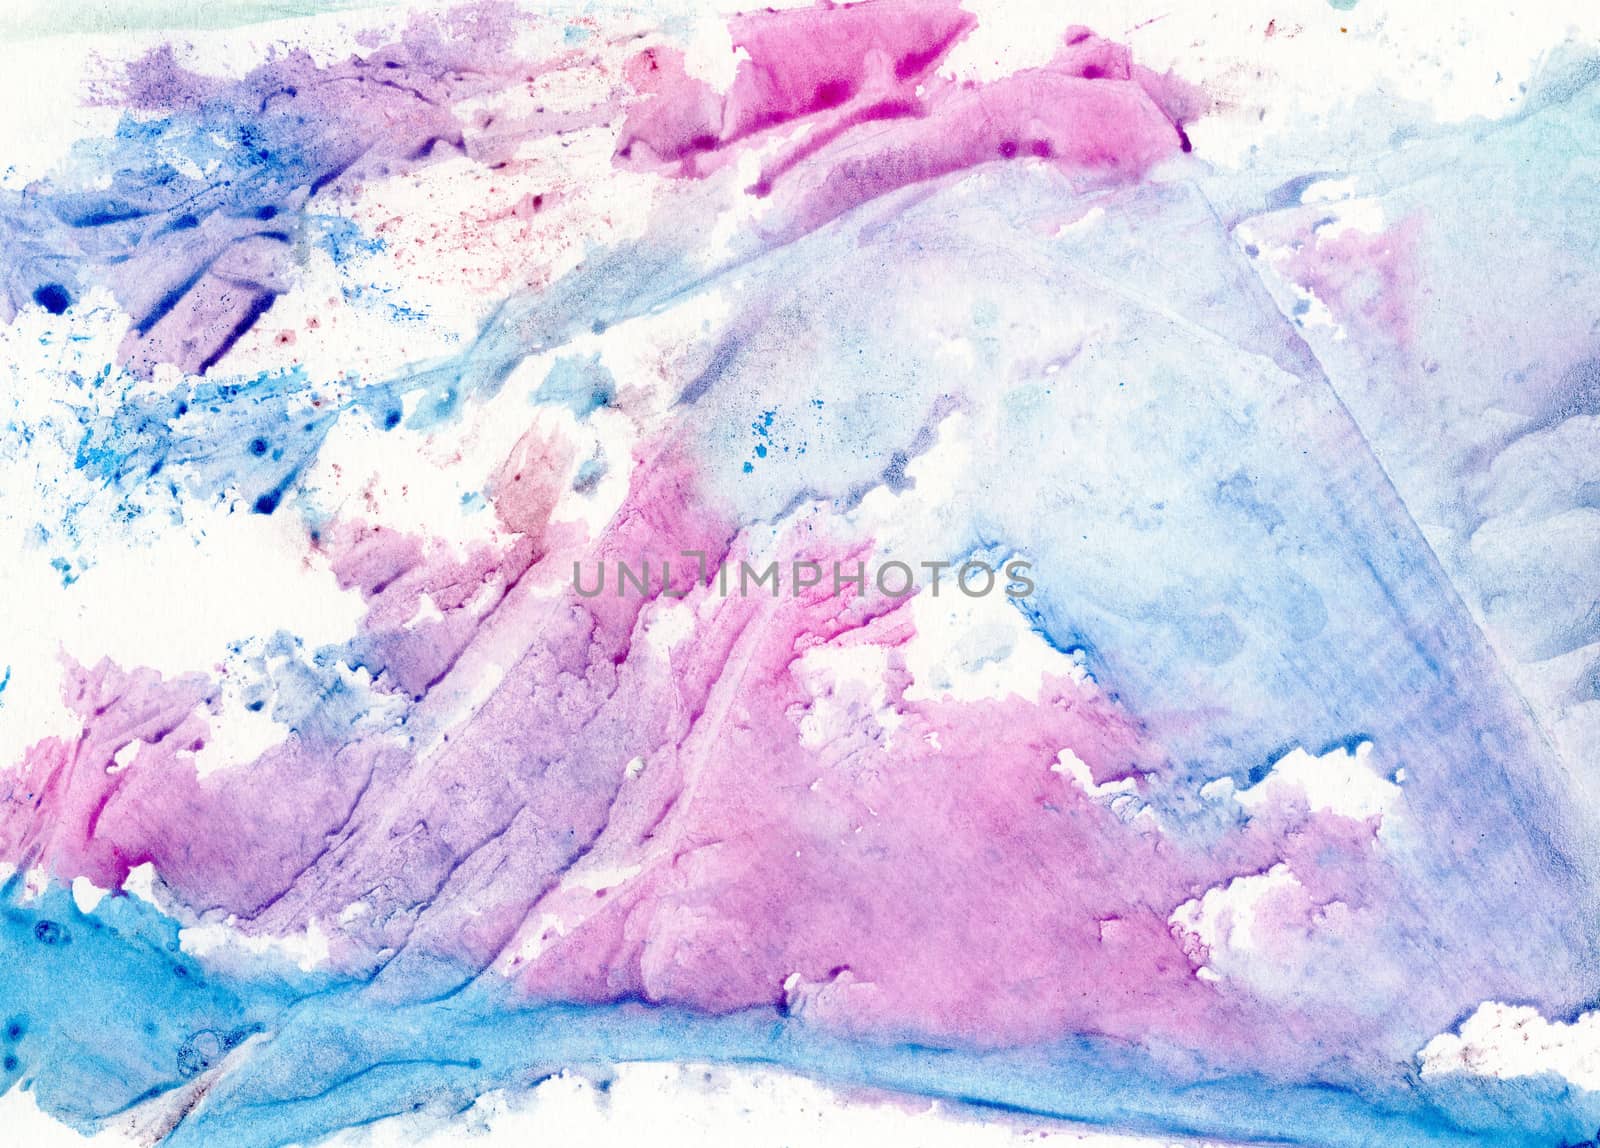 Abstract background of watercolor on paper texture, hand painted in blue and purple